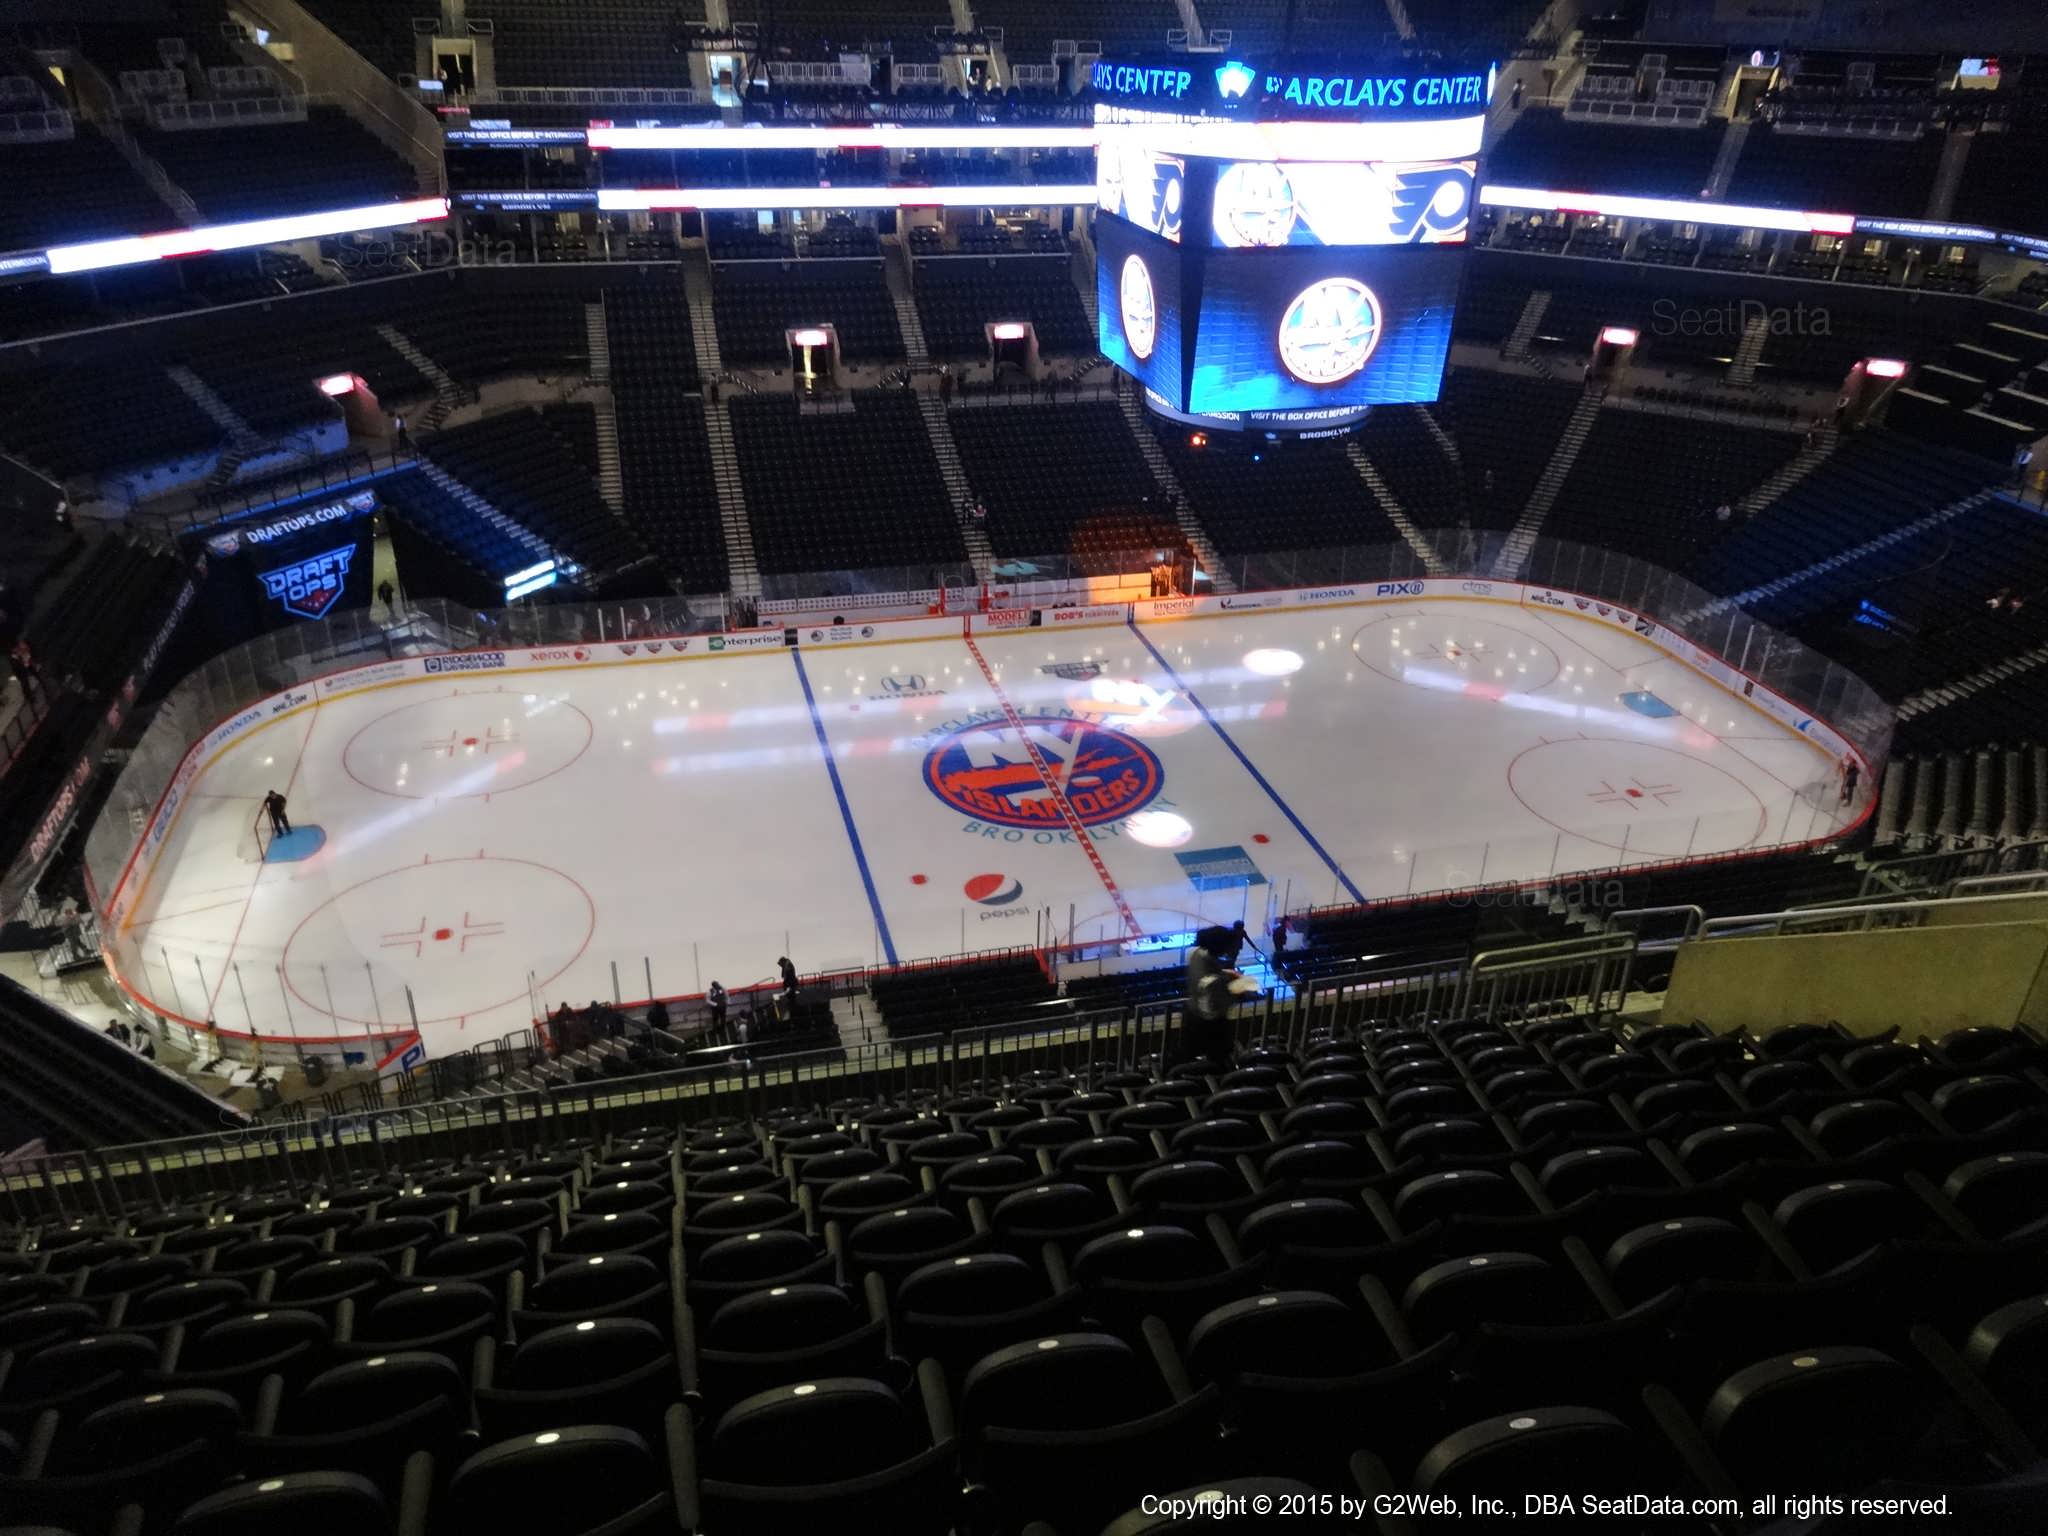 Seat View from Section 226 at the Barclays Center, home of the New York Islanders